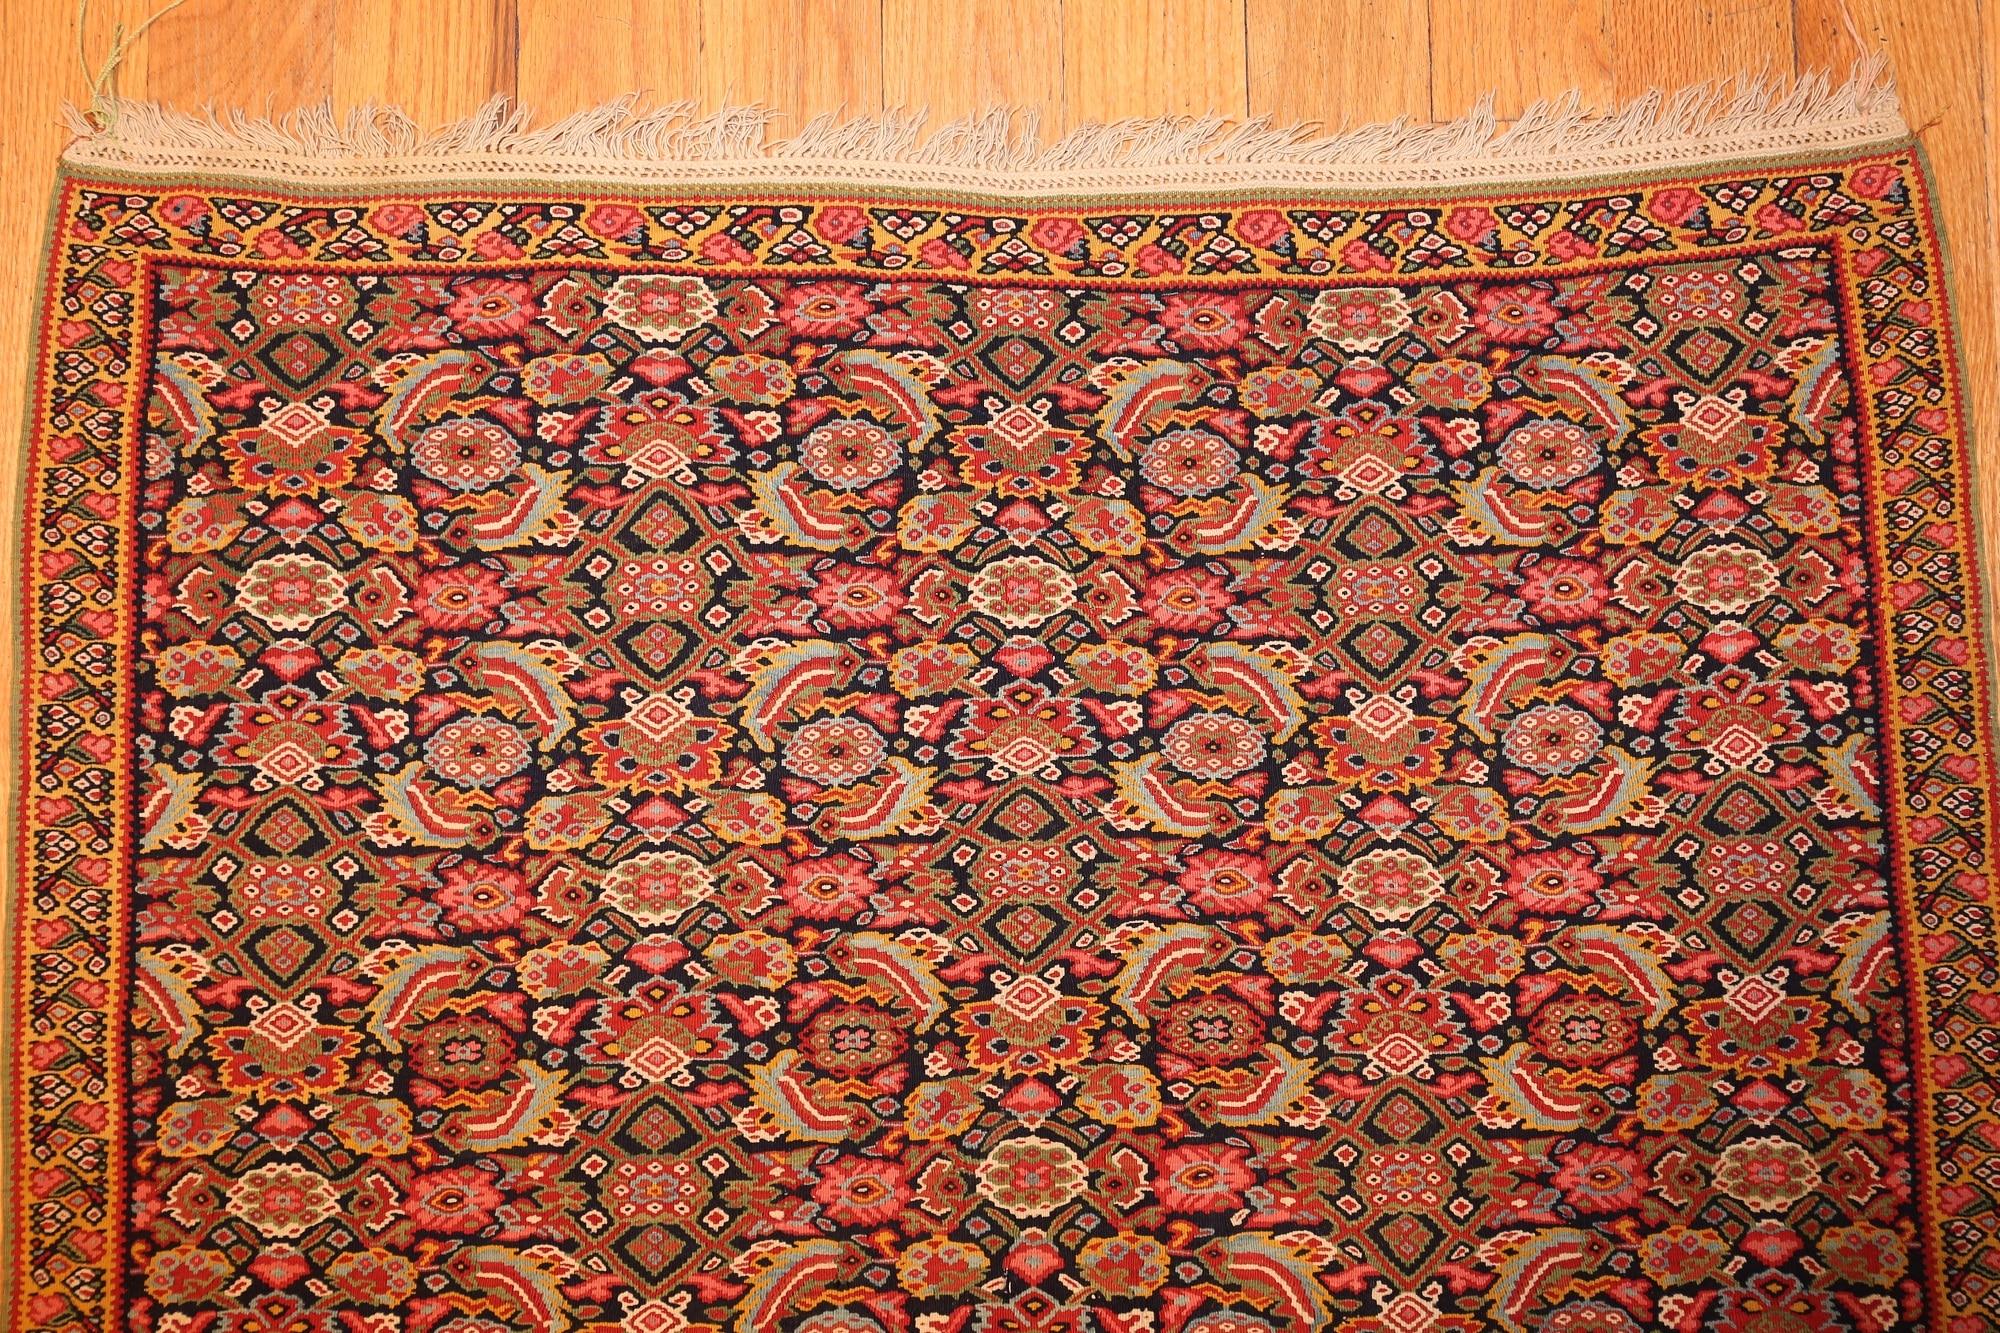 Hand-Woven Small Fine Antique Persian Senneh Kilim Rug. Size: 3 ft x 4 ft (0.91 m x 1.22 m)